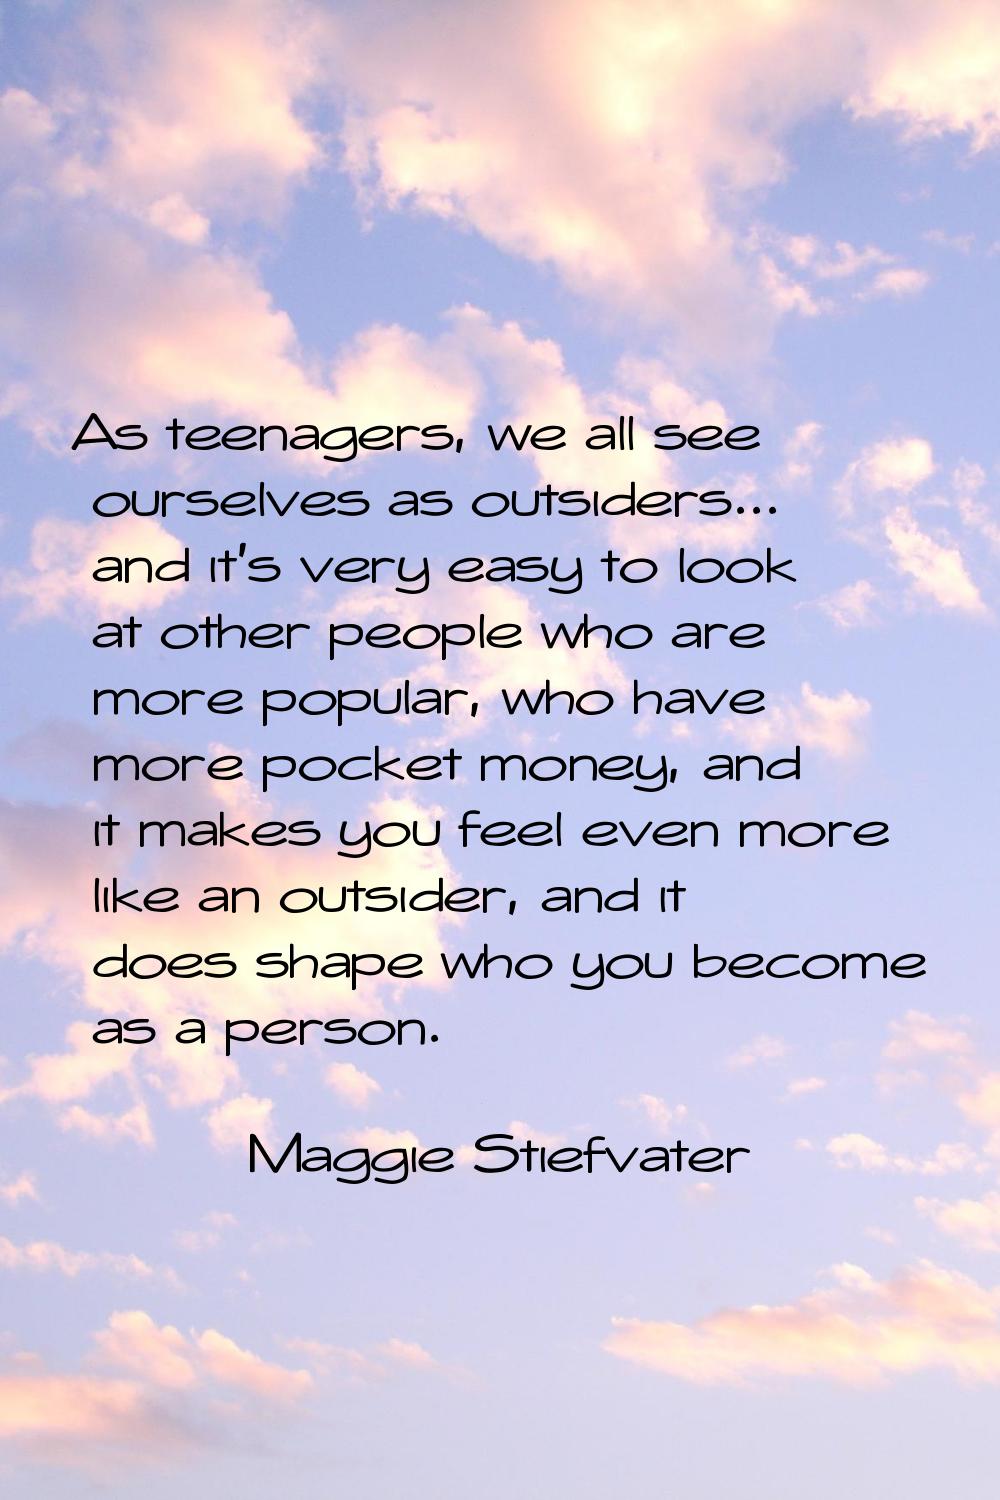 As teenagers, we all see ourselves as outsiders... and it's very easy to look at other people who a